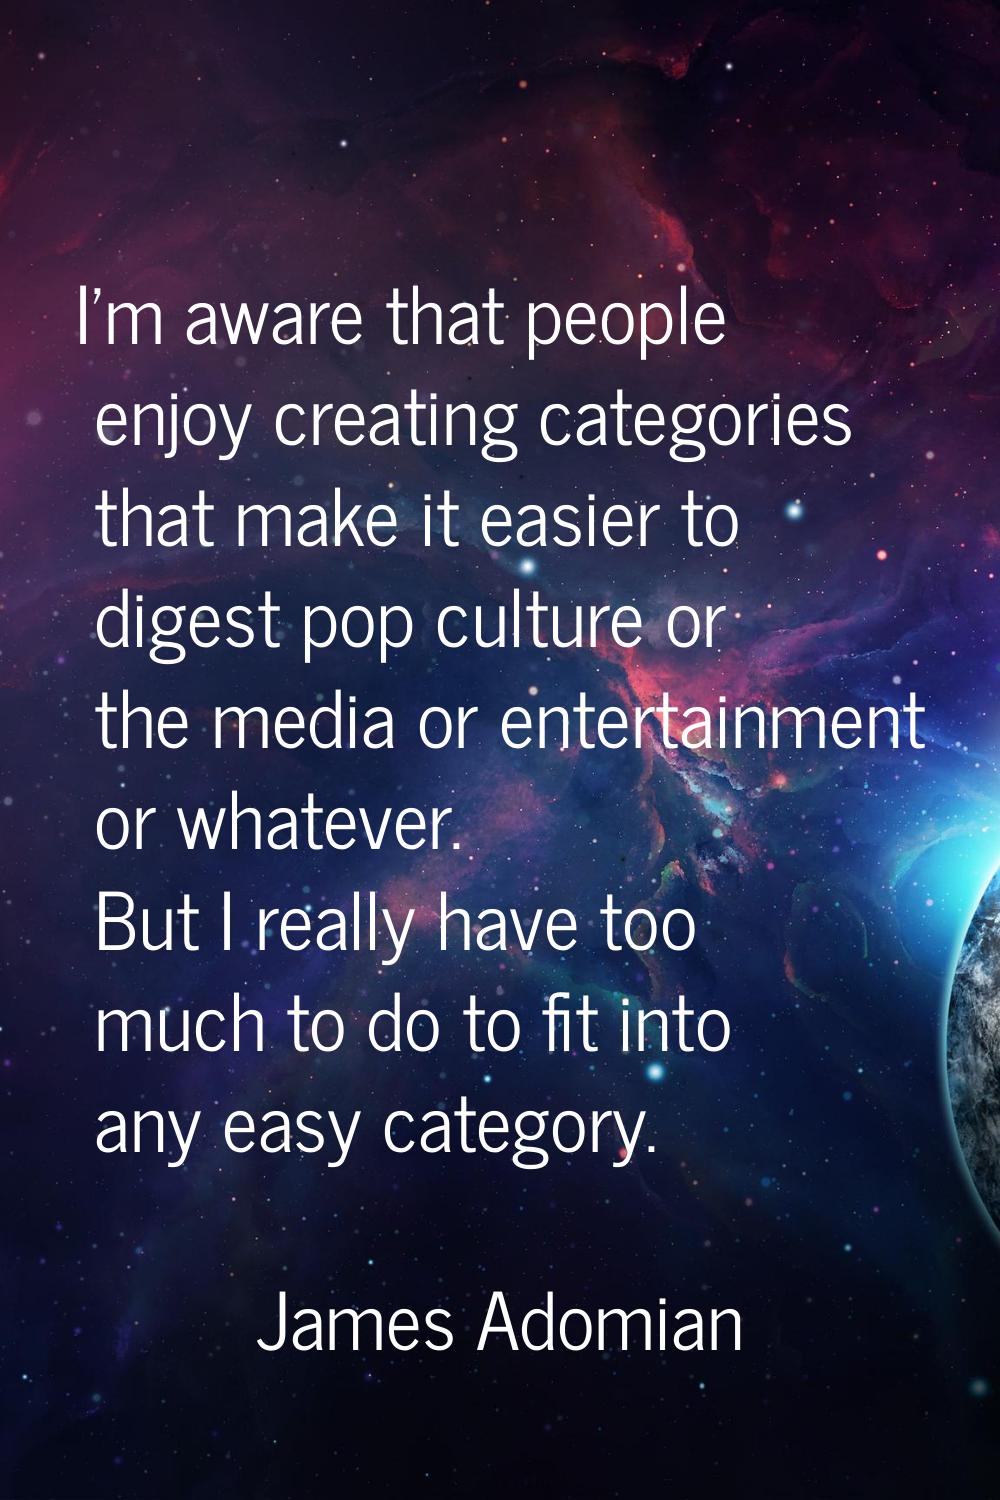 I'm aware that people enjoy creating categories that make it easier to digest pop culture or the me